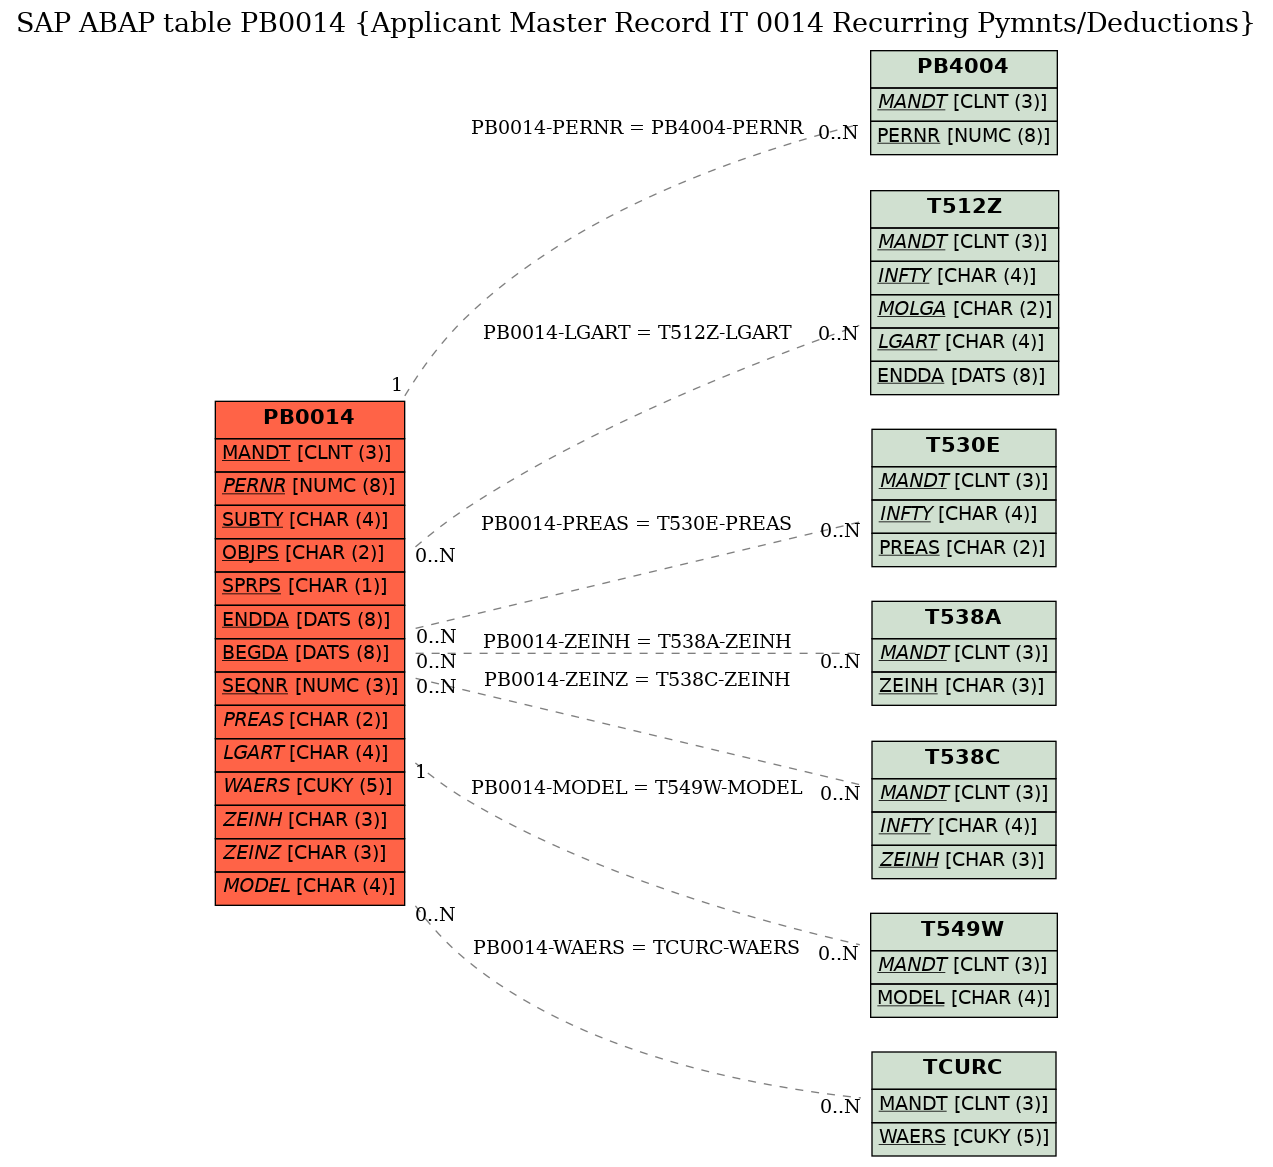 E-R Diagram for table PB0014 (Applicant Master Record IT 0014 Recurring Pymnts/Deductions)